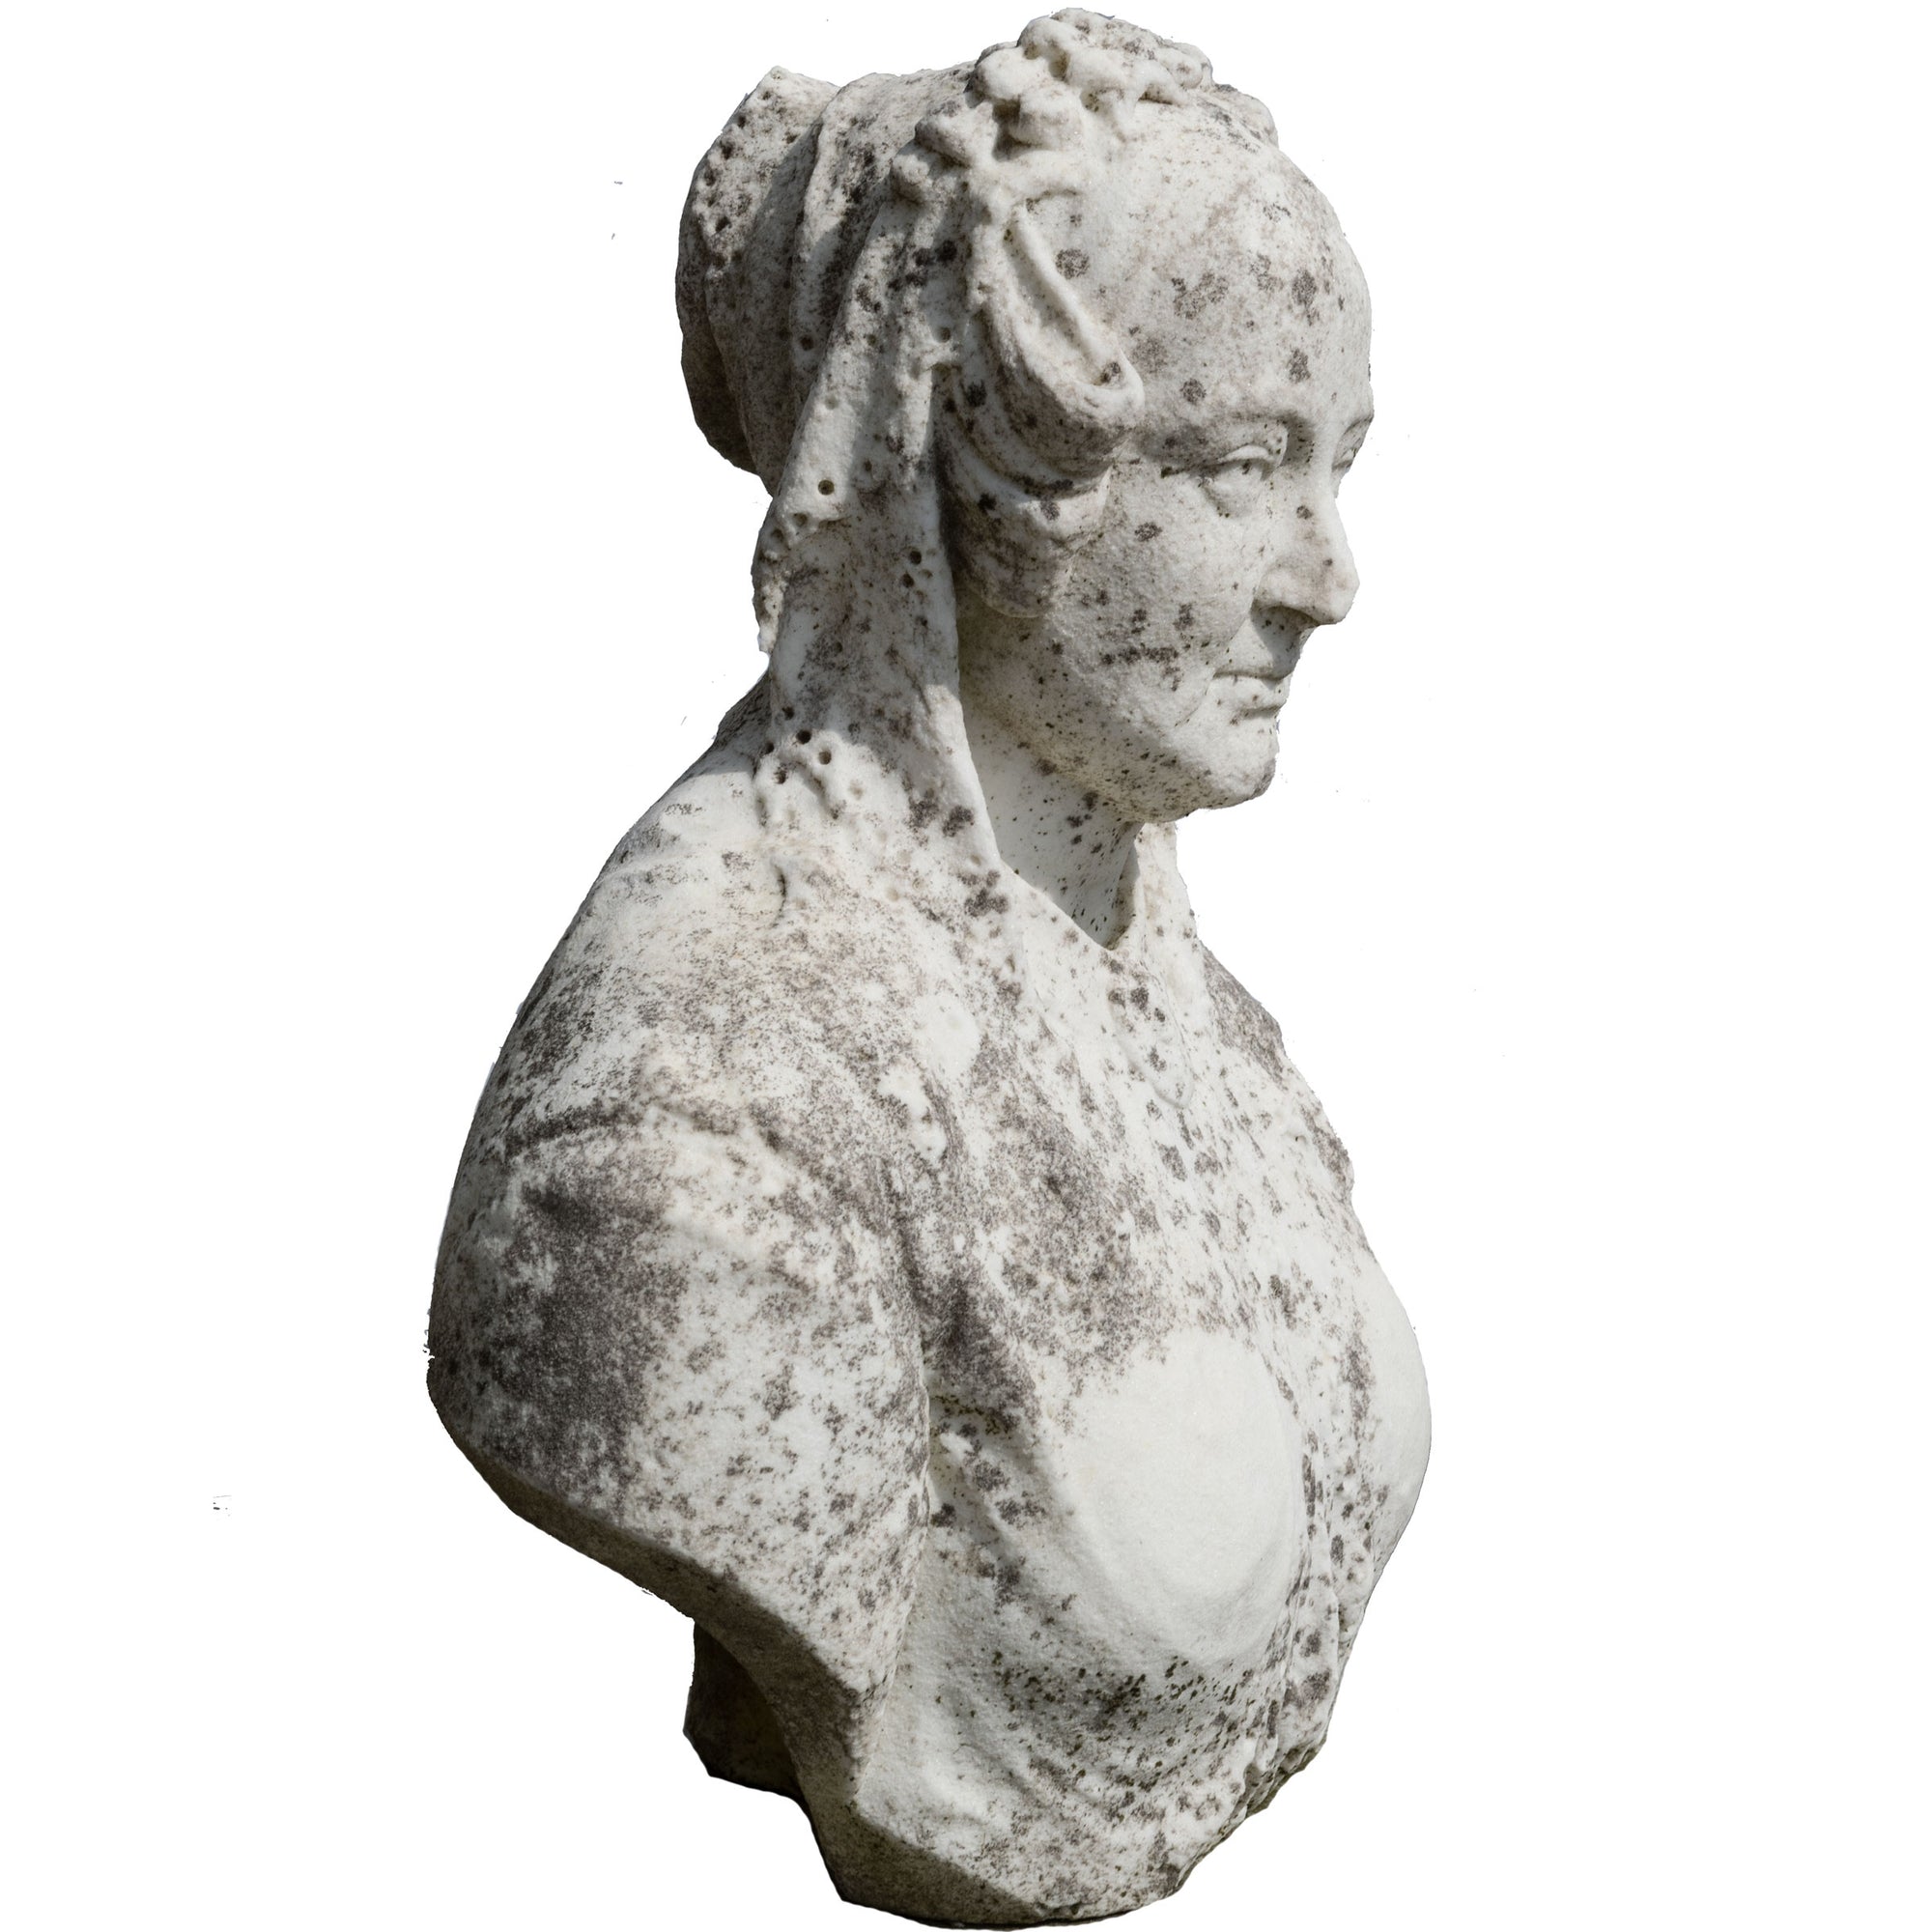 Antique Queen Victoria Bust Carved in Carrara Marble | The Architectural Forum